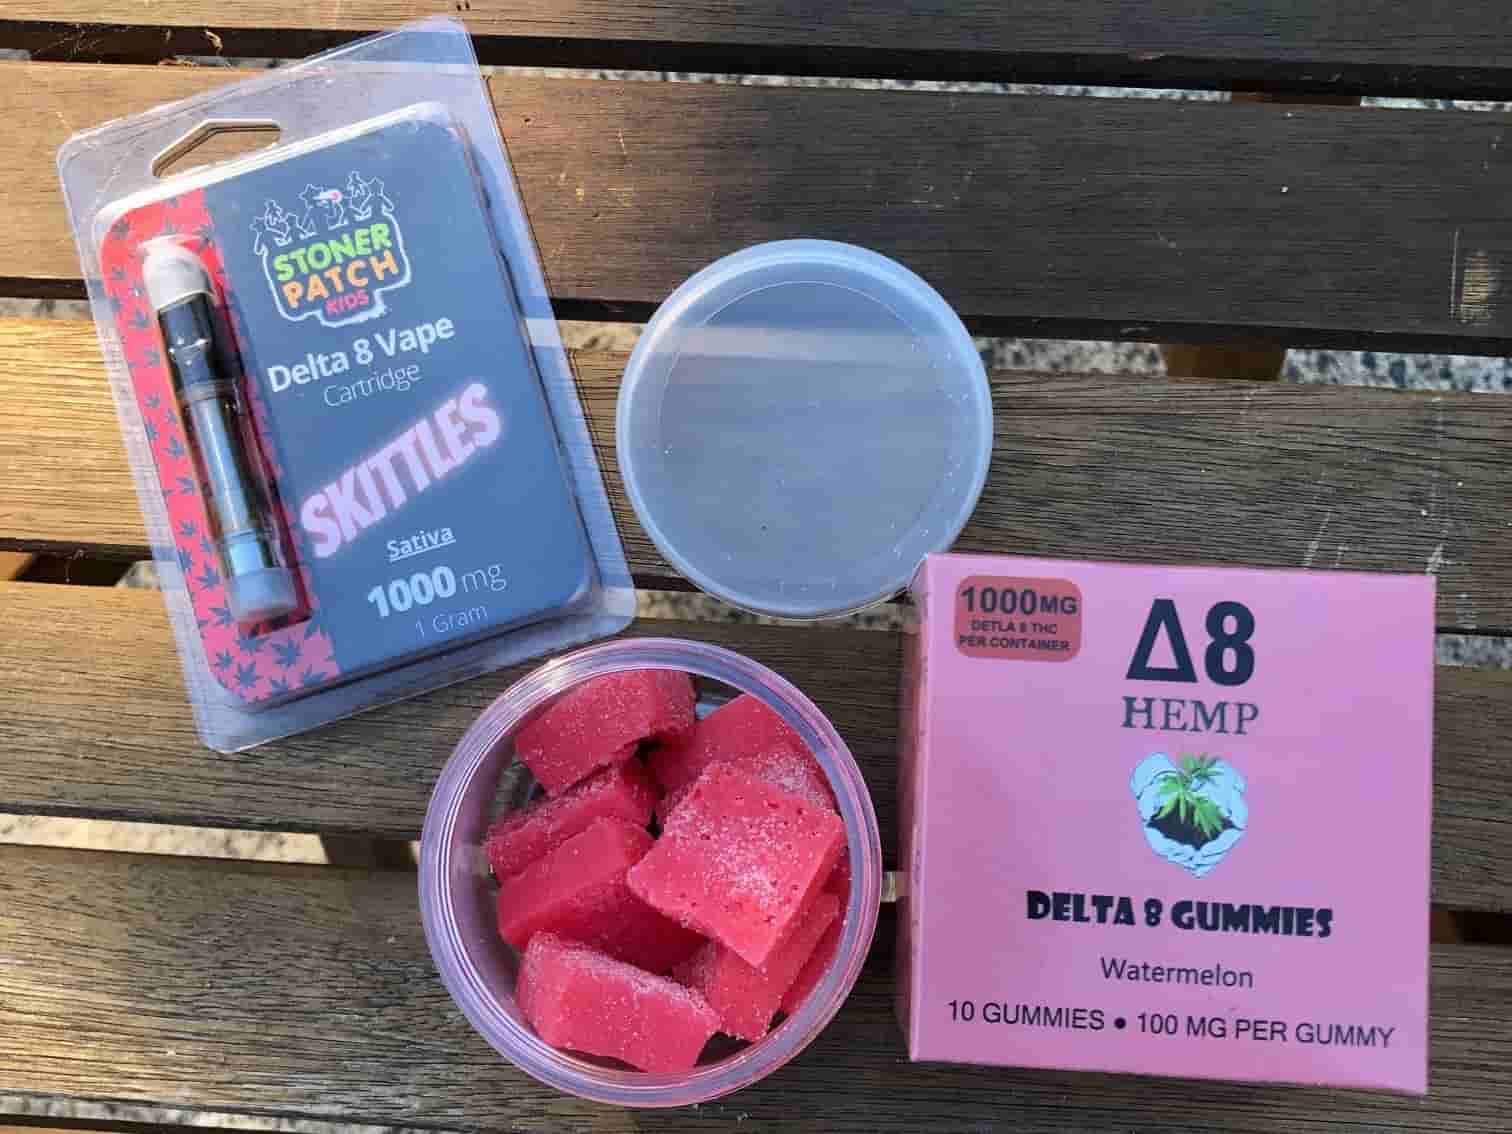 KOI DELTA 8 GUMMIES REVIEWS - Gummies|Thc|Products|Hemp|Product|Brand|Effects|Delta|Gummy|Cbd|Origin|Quality|Dosage|Delta-8|Dose|Usasource|Flavors|Brands|Ingredients|Range|Customers|Edibles|Cartridges|Reviews|Side|List|Health|Cannabis|Lab|Customer|Options|Benefits|Overviewproducts|Research|Time|Market|Drug|Farms|Party|People|Delta-8 Thc|Delta-8 Products|Delta-9 Thc|Delta-8 Gummies|Delta-8 Thc Products|Delta-8 Brands|Customer Reviews|Brand Overviewproducts|Drug Tests|Free Shipping|Similar Benefits|Vape Cartridges|Hemp Doctor|United States|Third Party Lab|Drug Test|Thc Edibles|Health Canada|Cannabis Plant|Side Effects|Organic Hemp|Diamond Cbd|Reaction Time|Legal Hemp|Psychoactive Effects|Psychoactive Properties|Third Party|Dry Eyes|Delta-8 Market|Tolerance Level